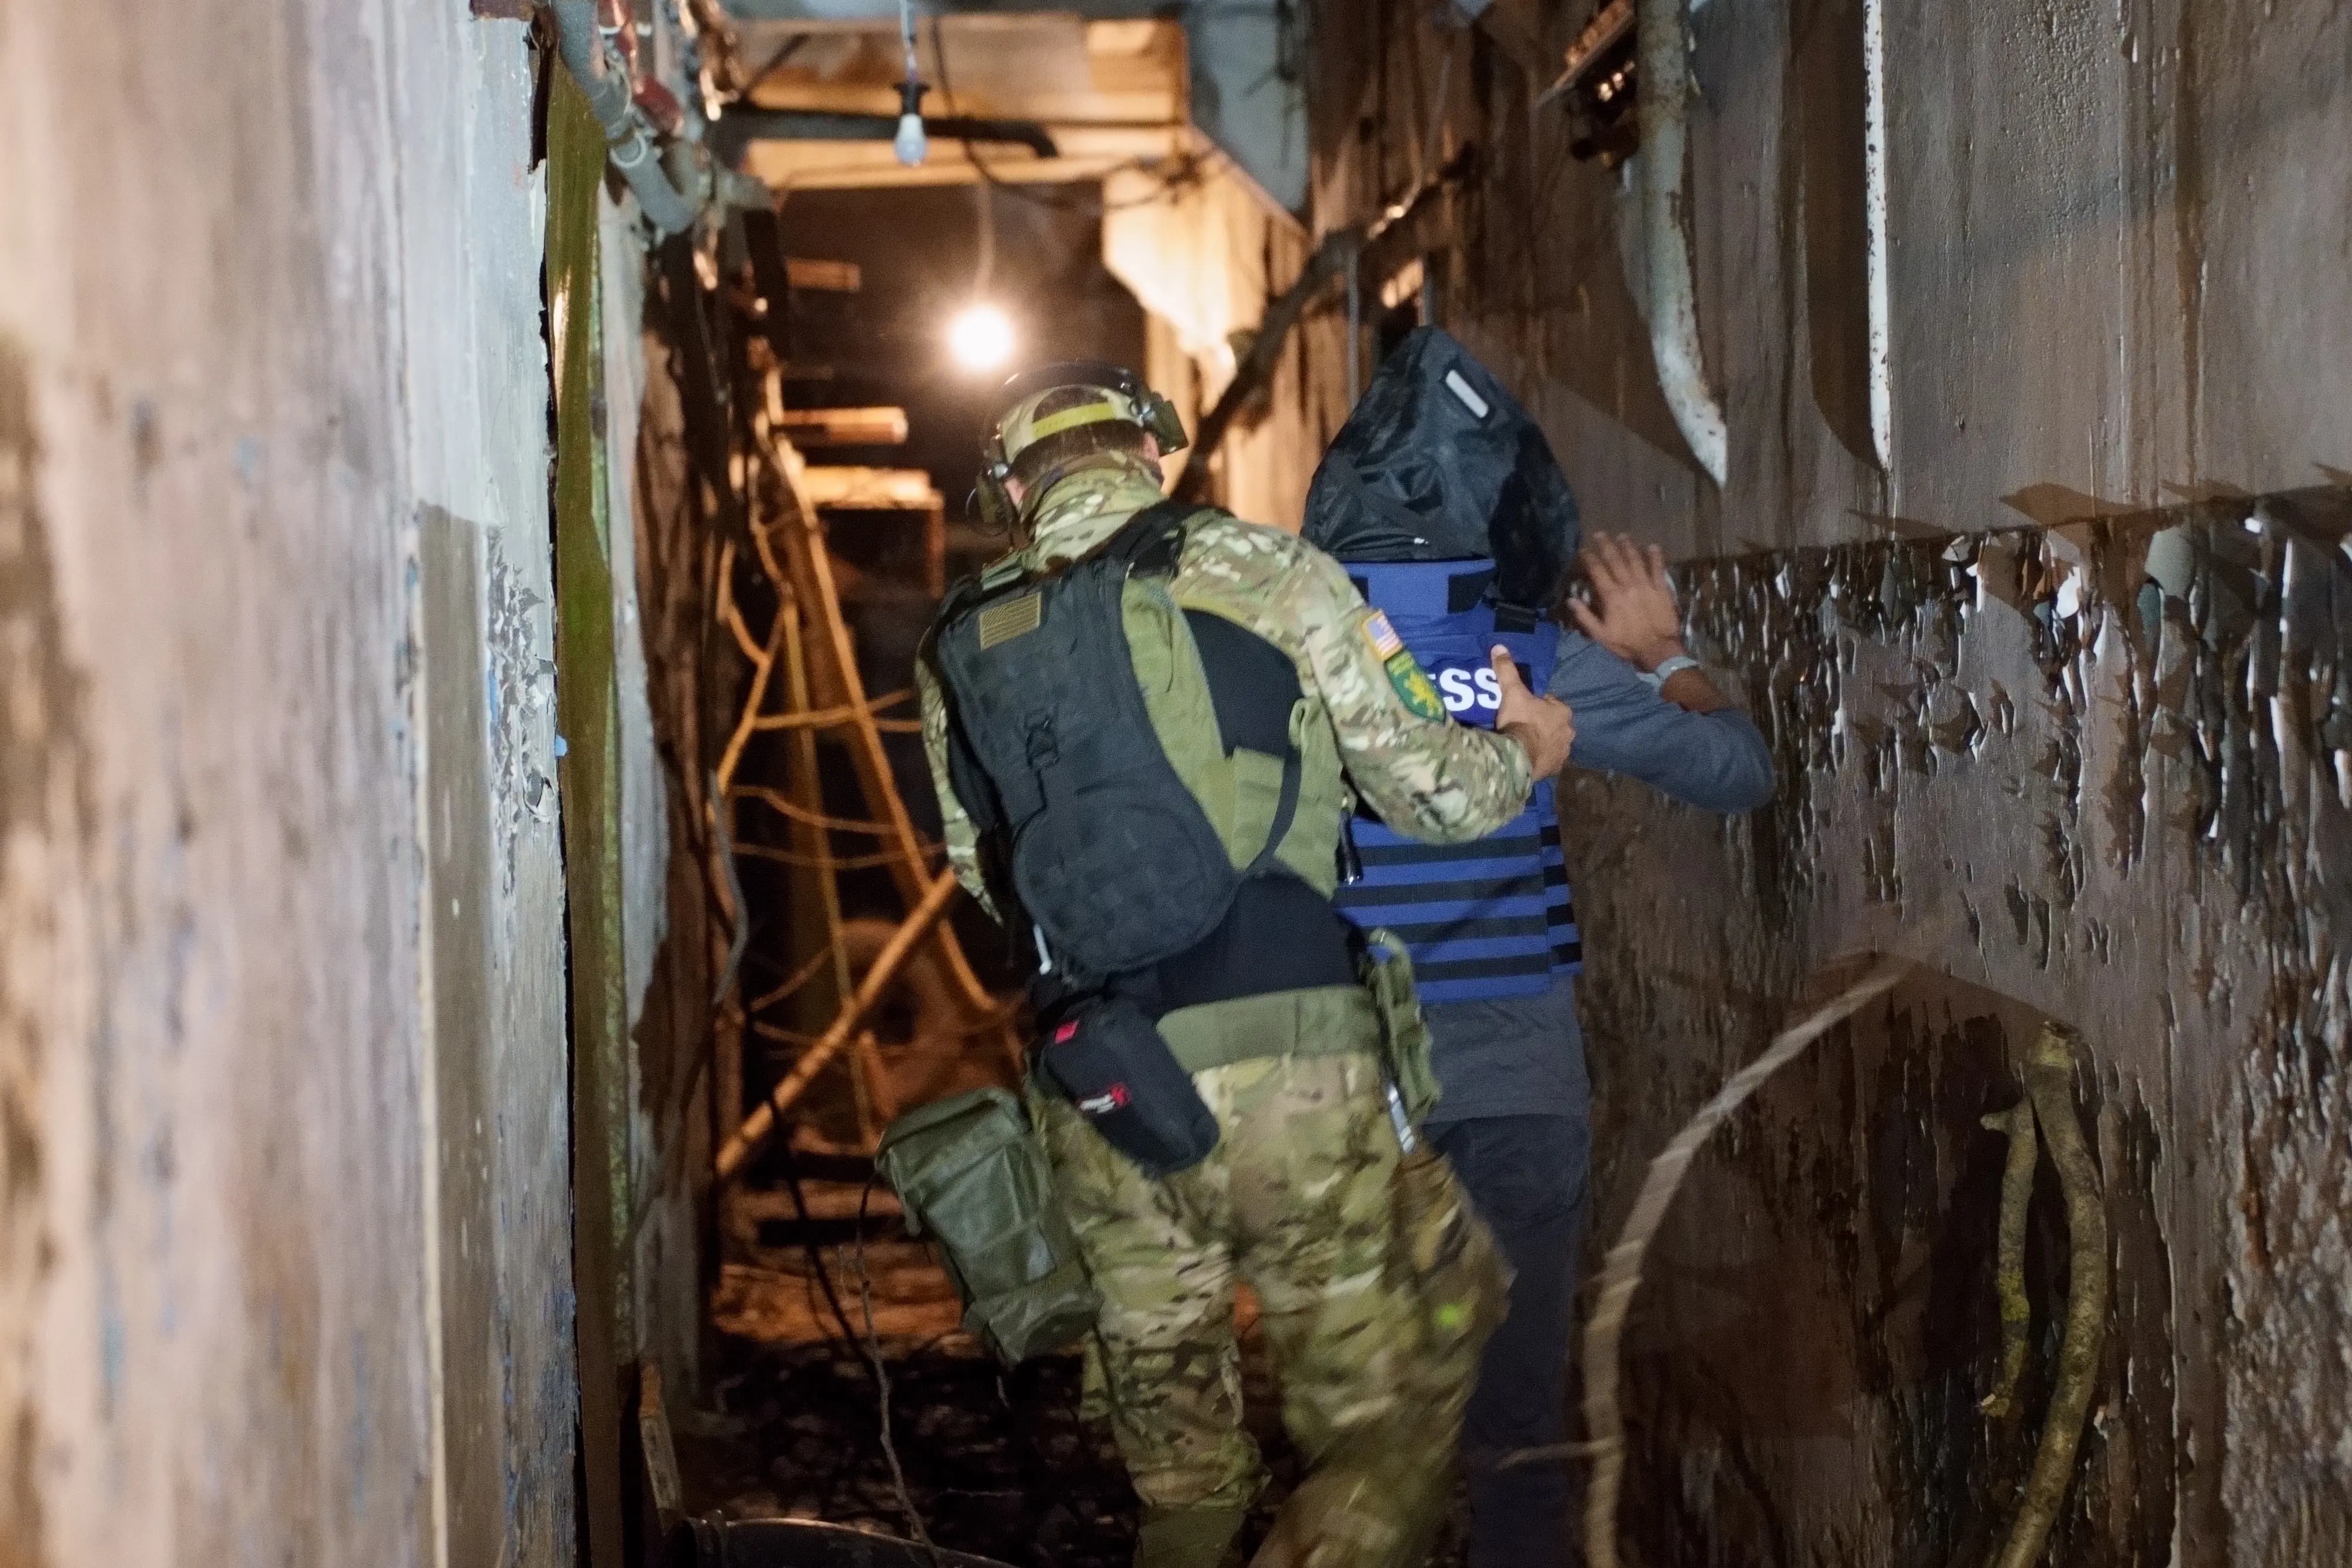 A man in military gear leads another guy down the tunnel